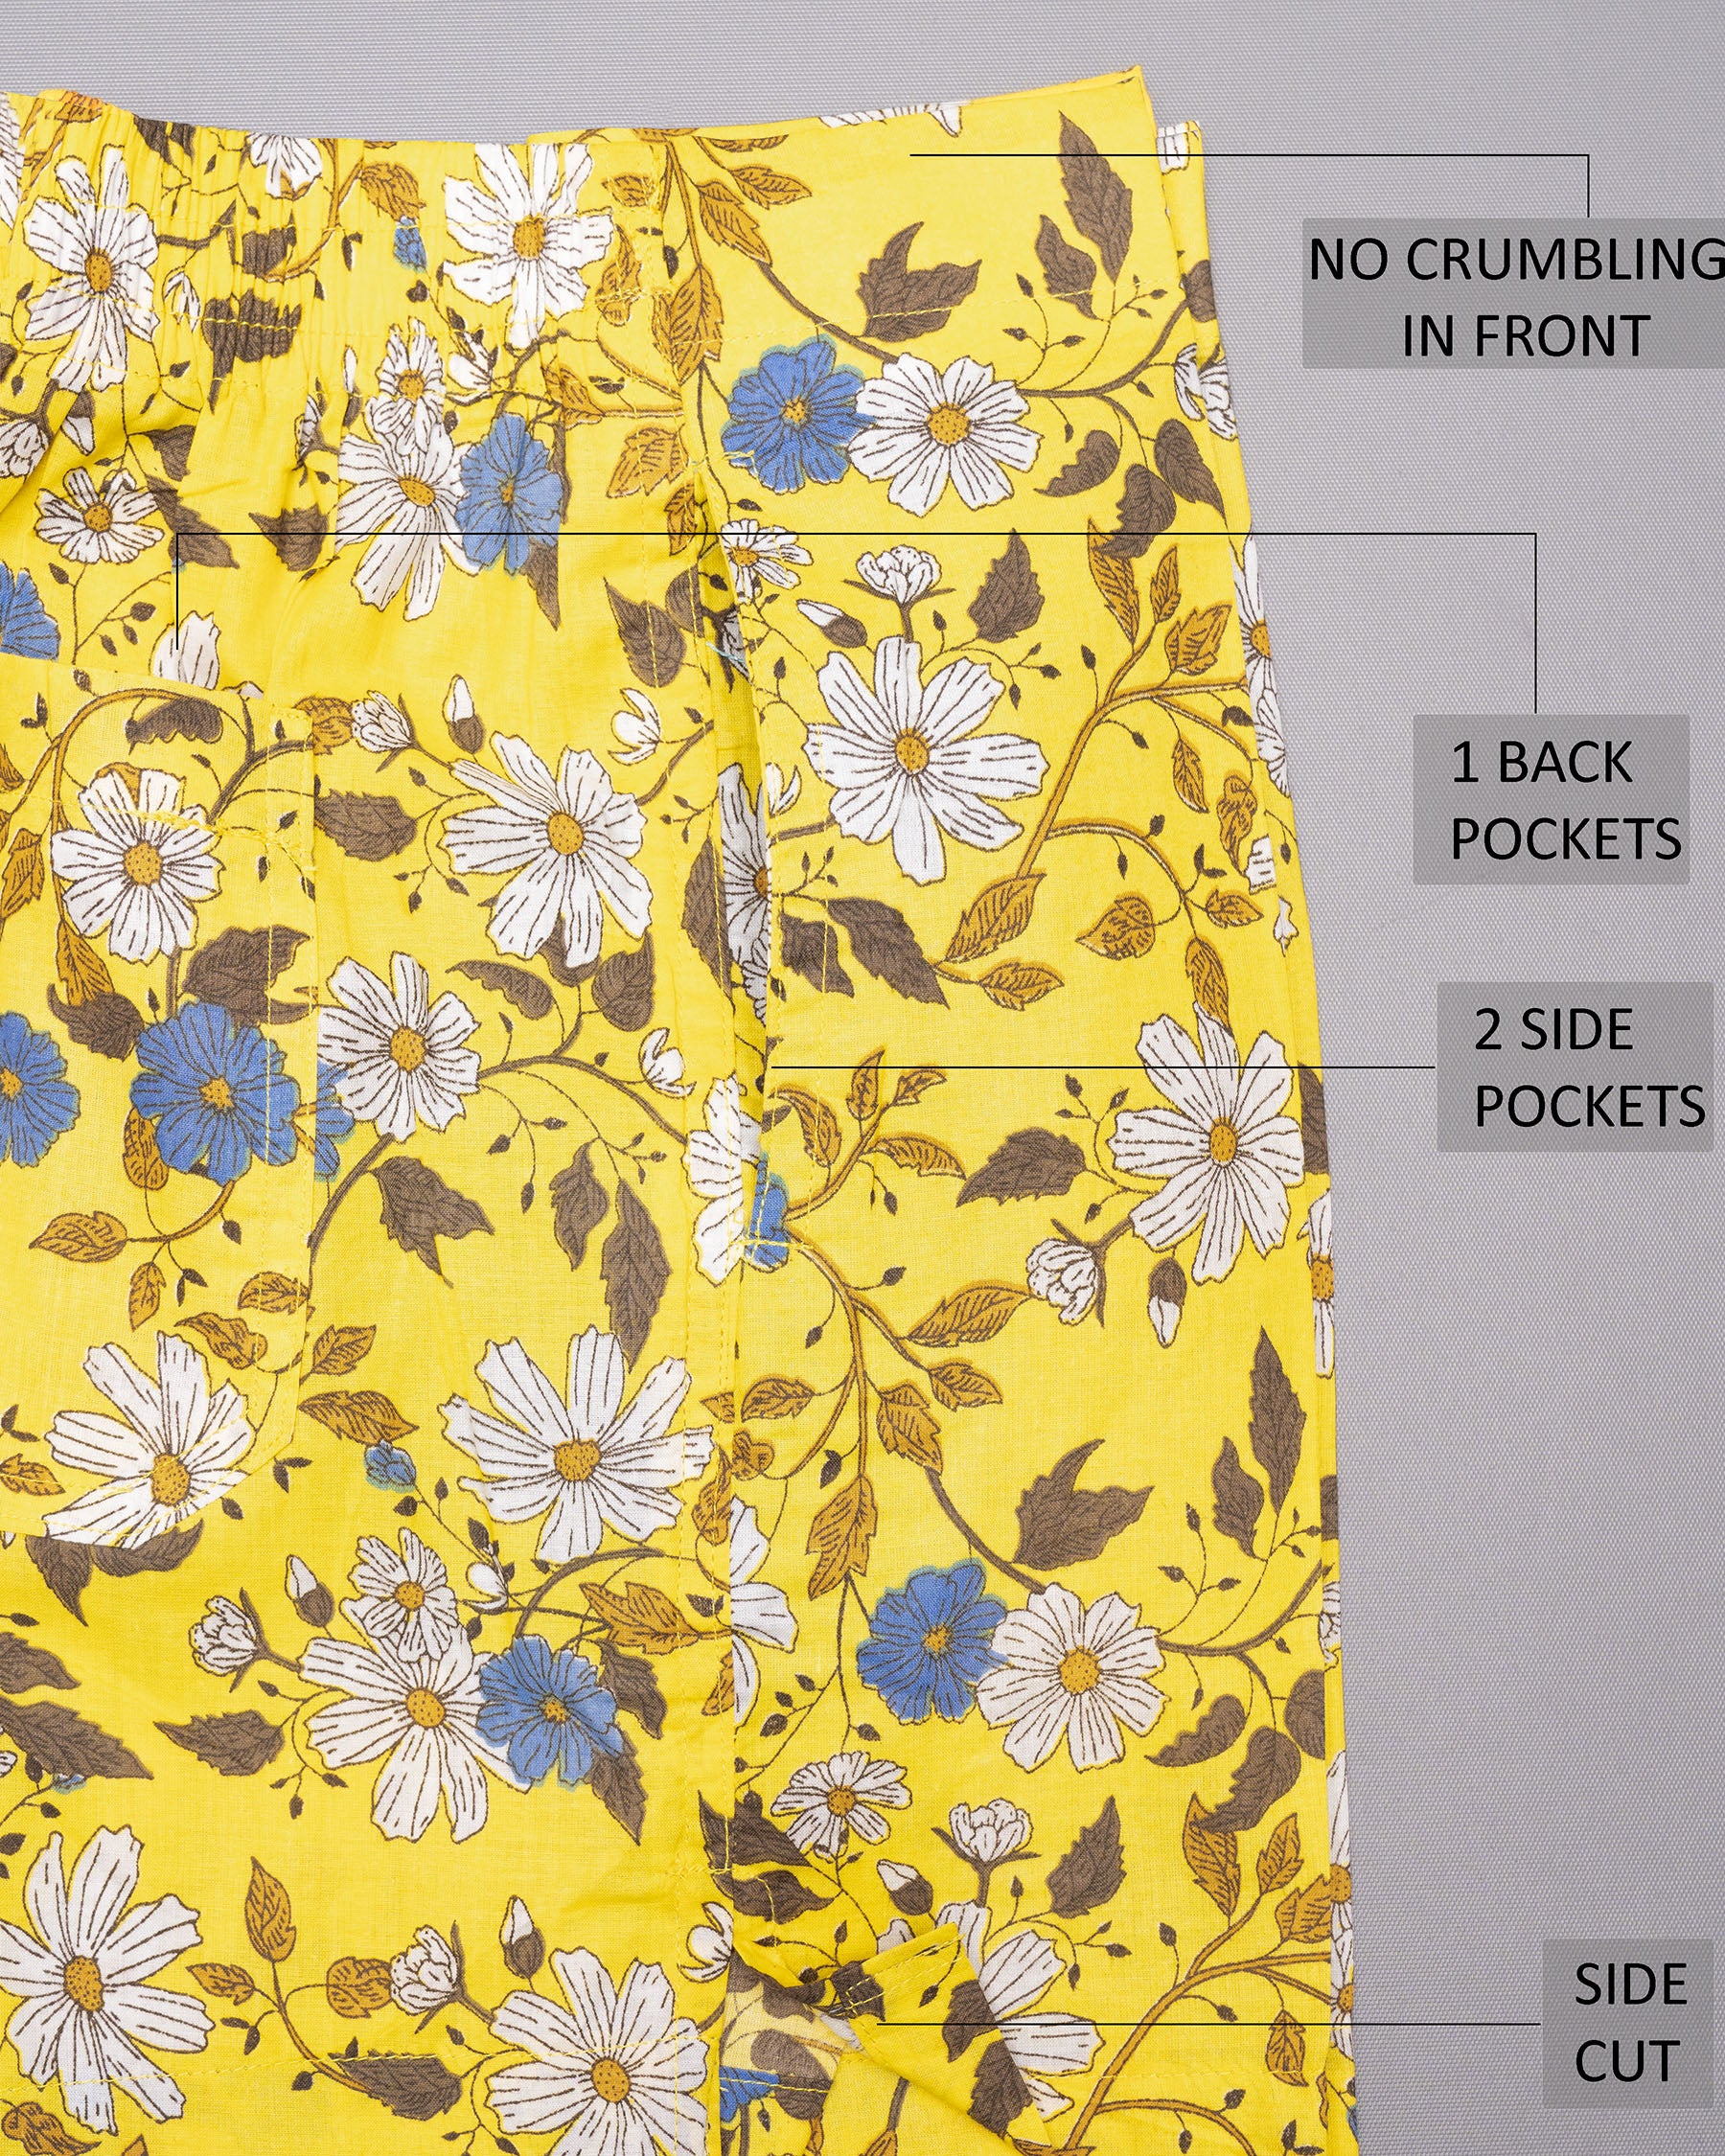 Gorse Yellow Flowers Printed and Cupid Printed Premium Cotton Boxers BX385-28, BX385-30, BX385-32, BX385-34, BX385-36, BX385-38, BX385-40, BX385-42, BX385-44